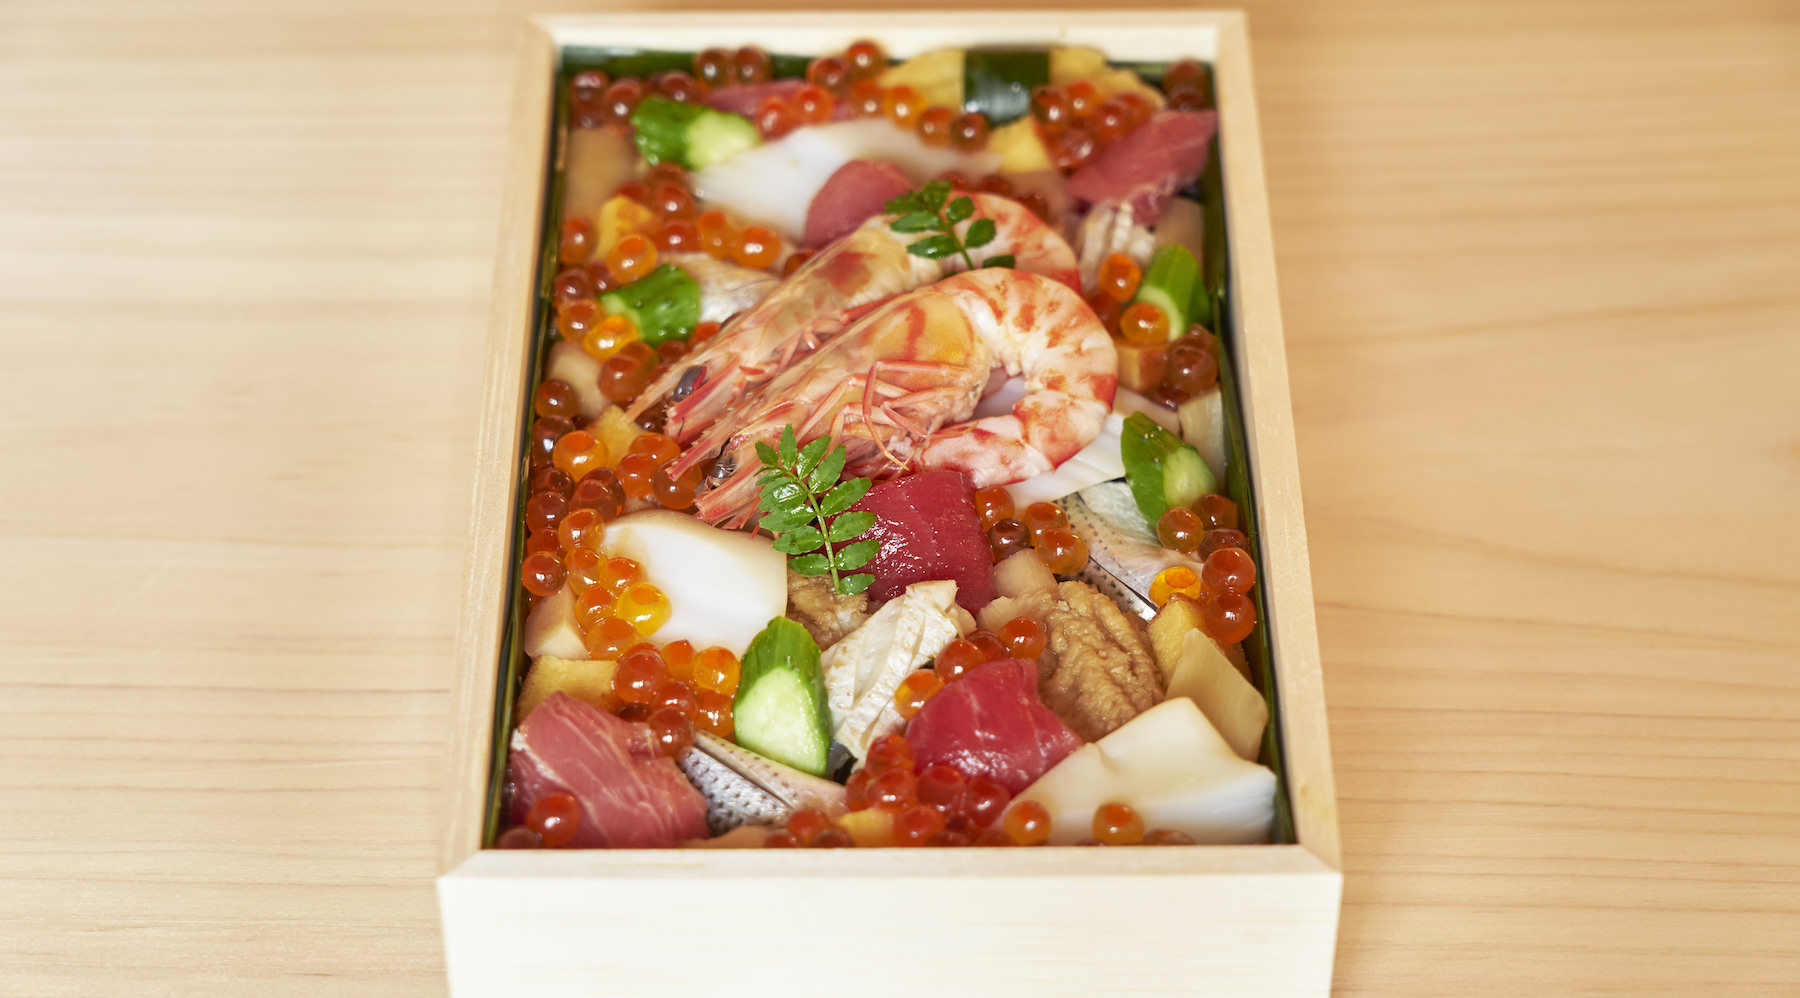 Sushi Ao (Takeaway)'s images2